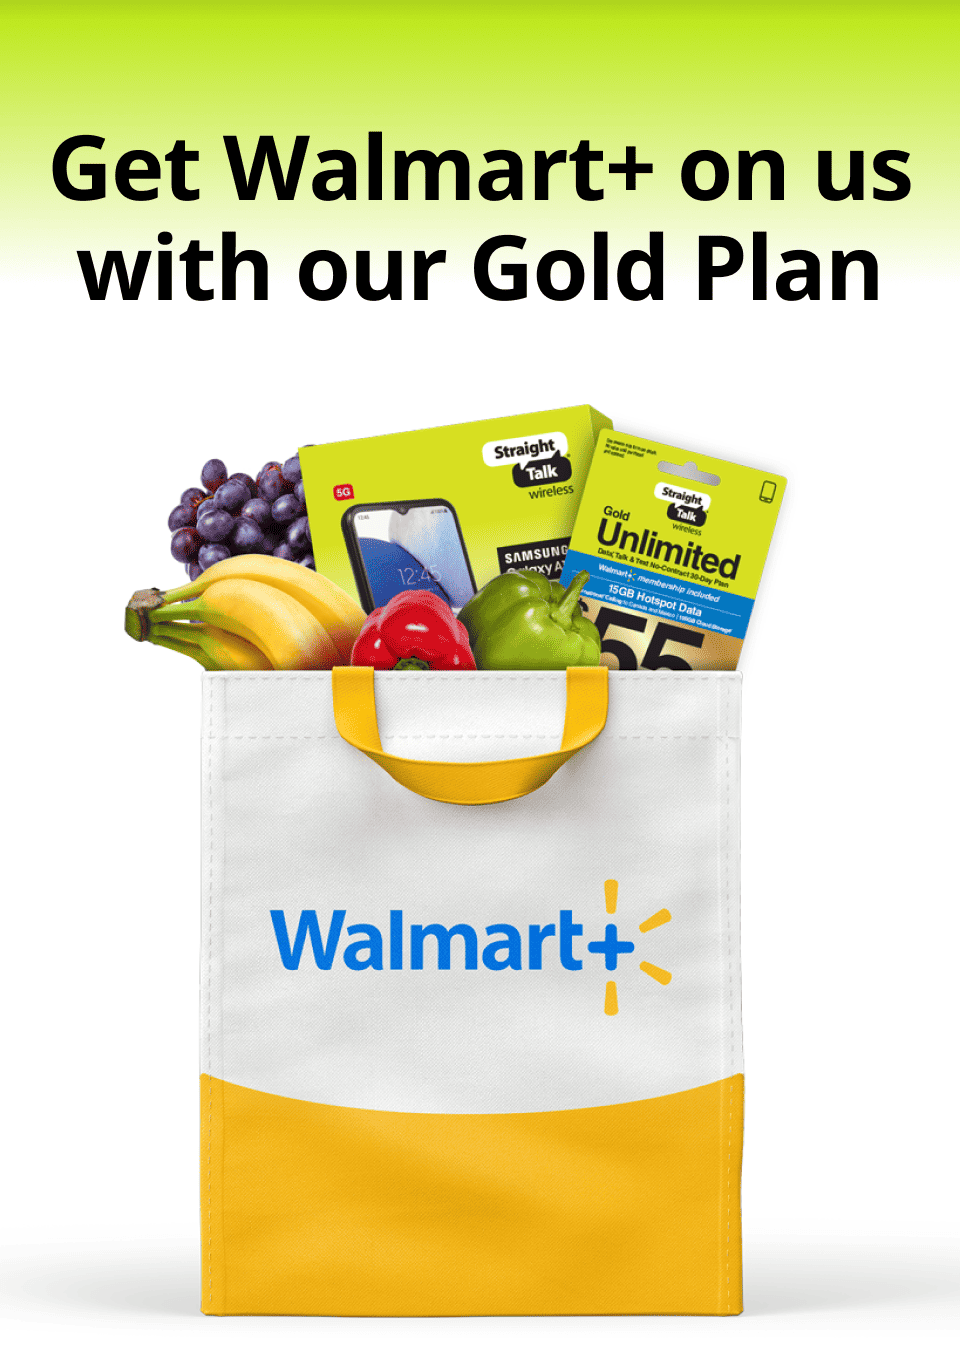 Get Walmart+ on us with our Gold Plan